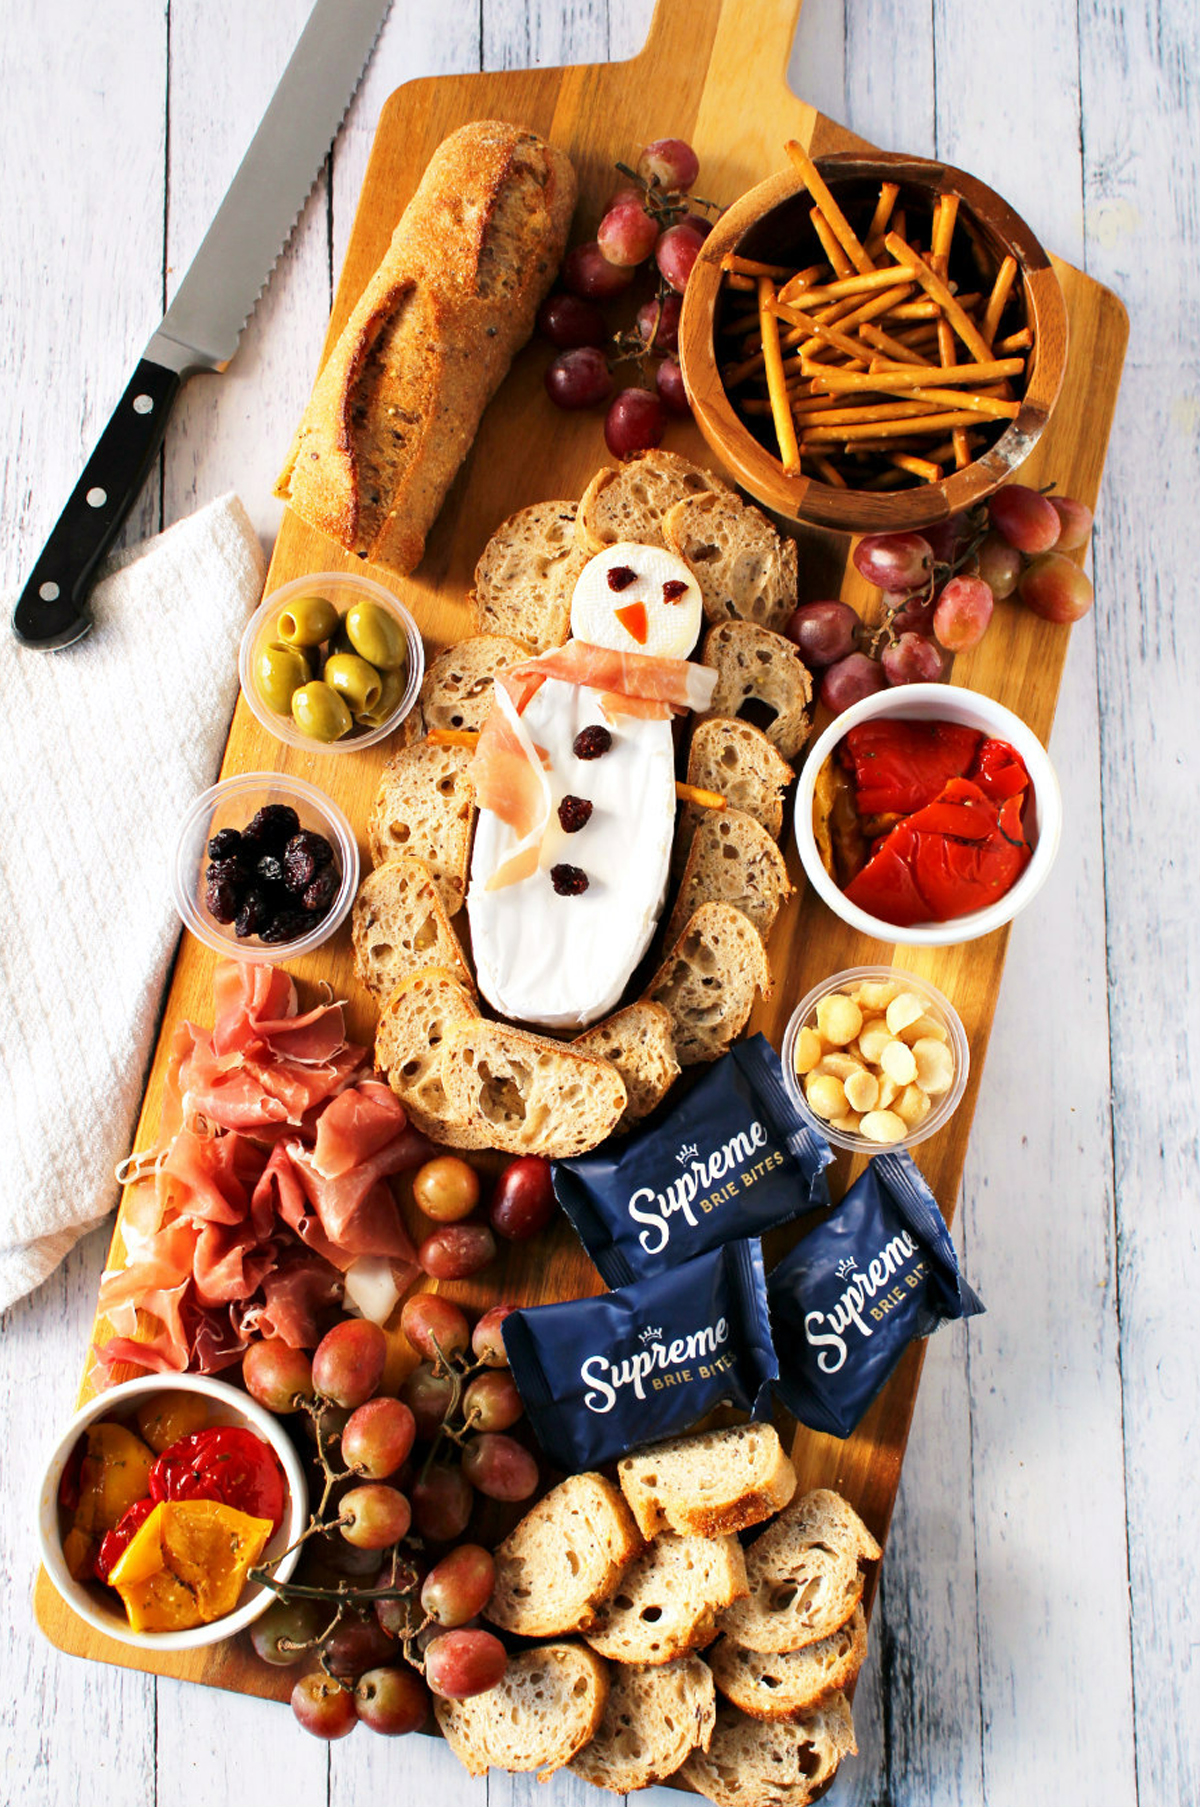 A brie snowman, pretzels, olives, grapes, and meat are included on Living La Vida Holoka's brie cheese board.